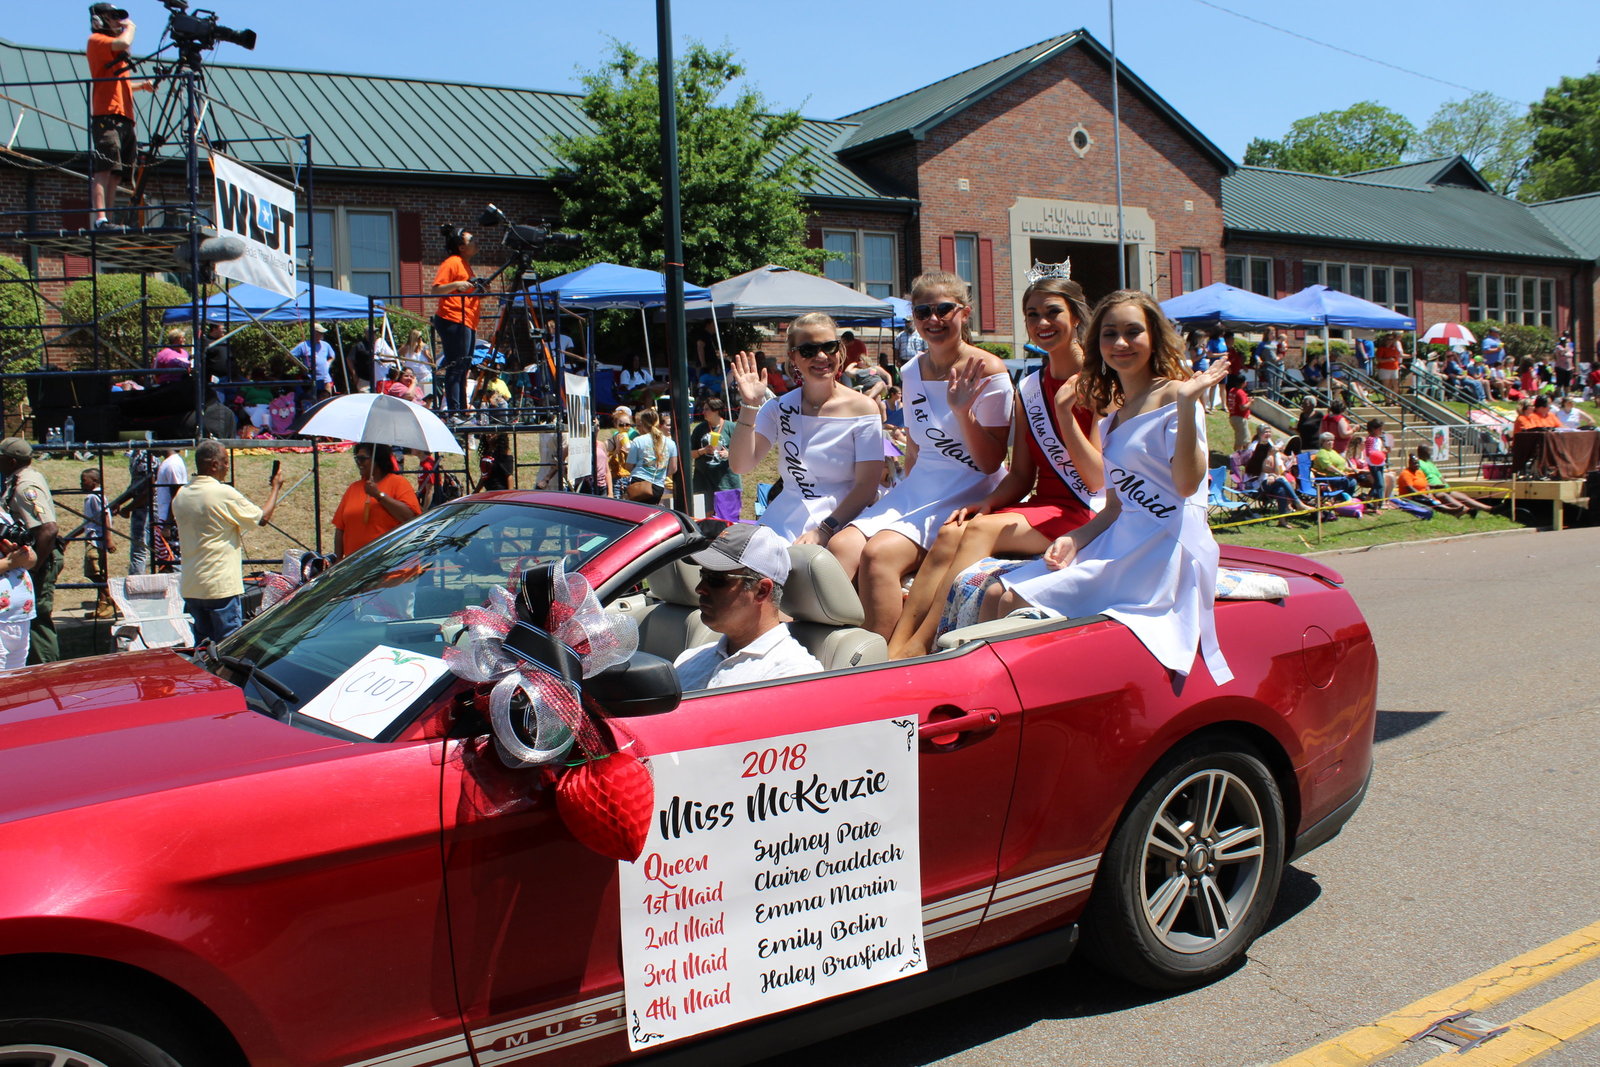 West Tennessee Strawberry Festival - Humboldt TN - Girls Parade11